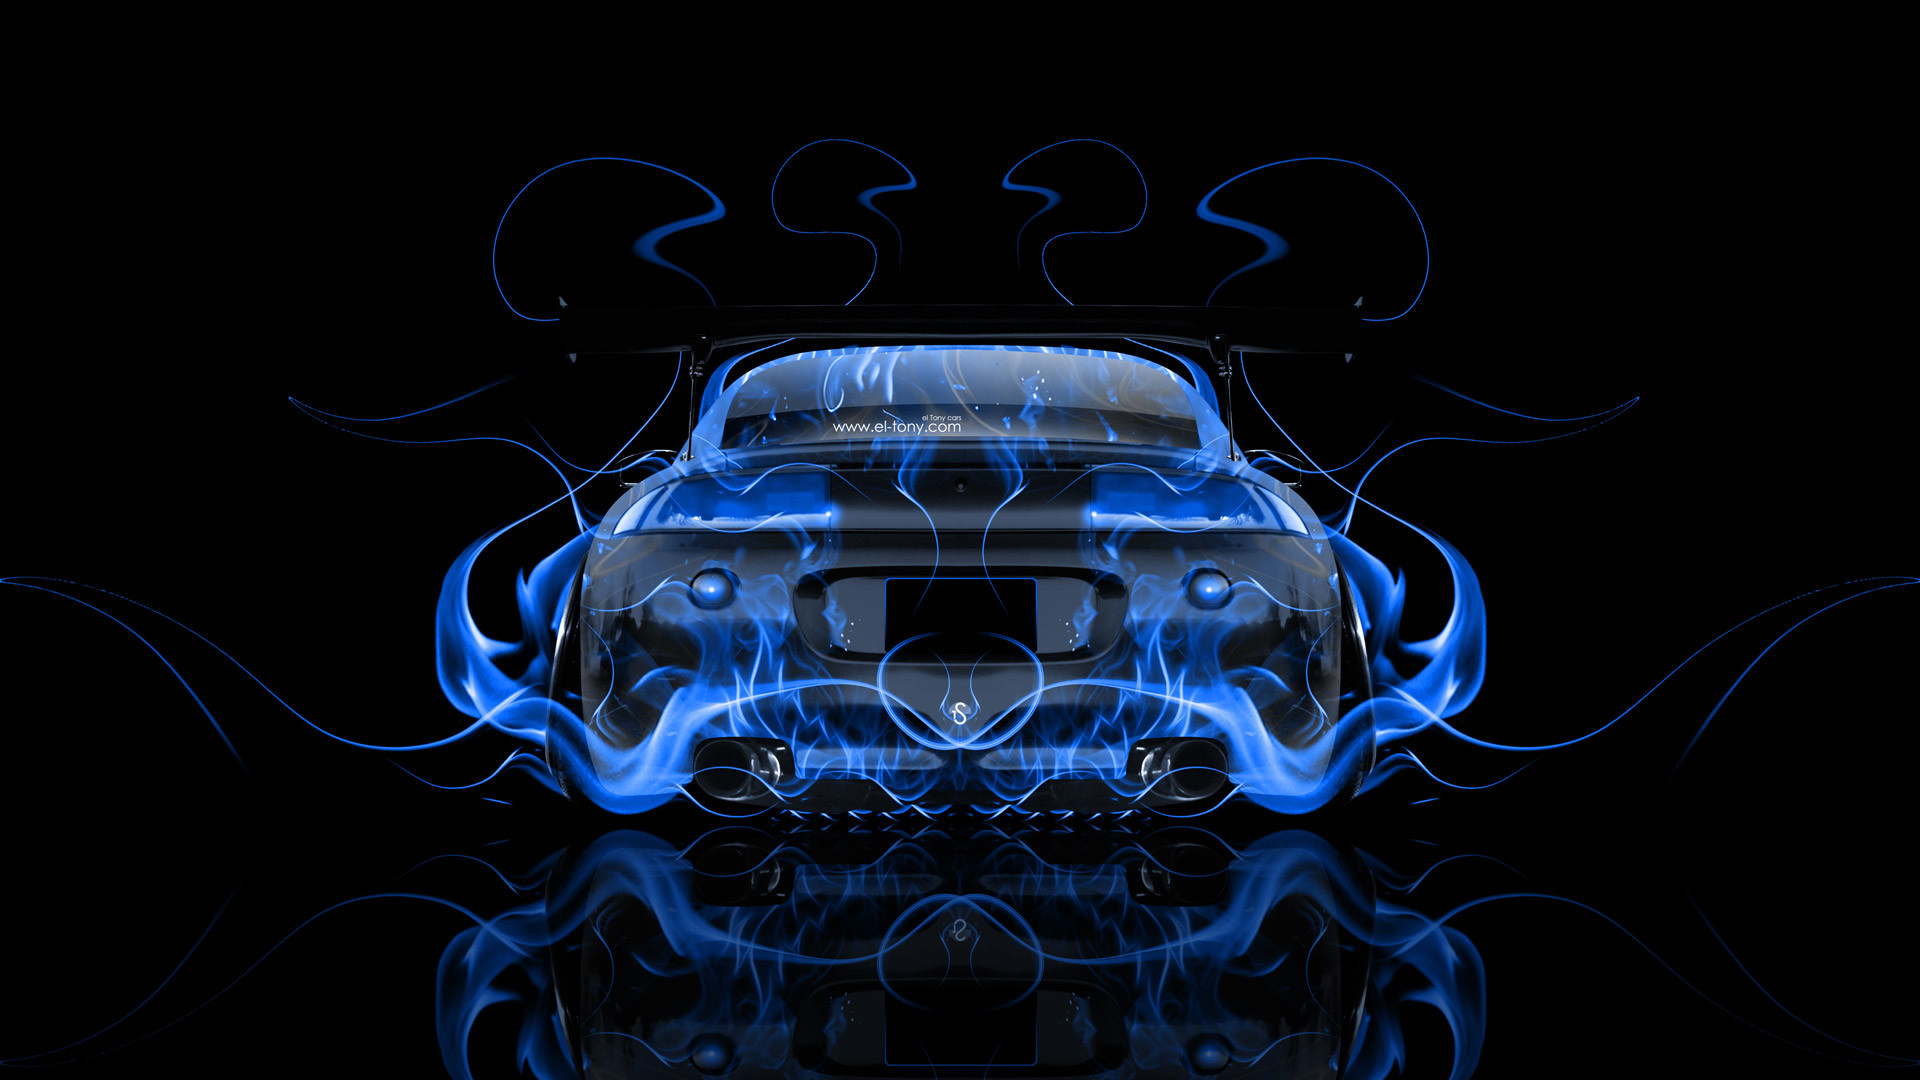 1920x1080 ... Mitsubishi-Eclipse-JDM-Tuning-Back-Blue-Fire-Abstract- ...